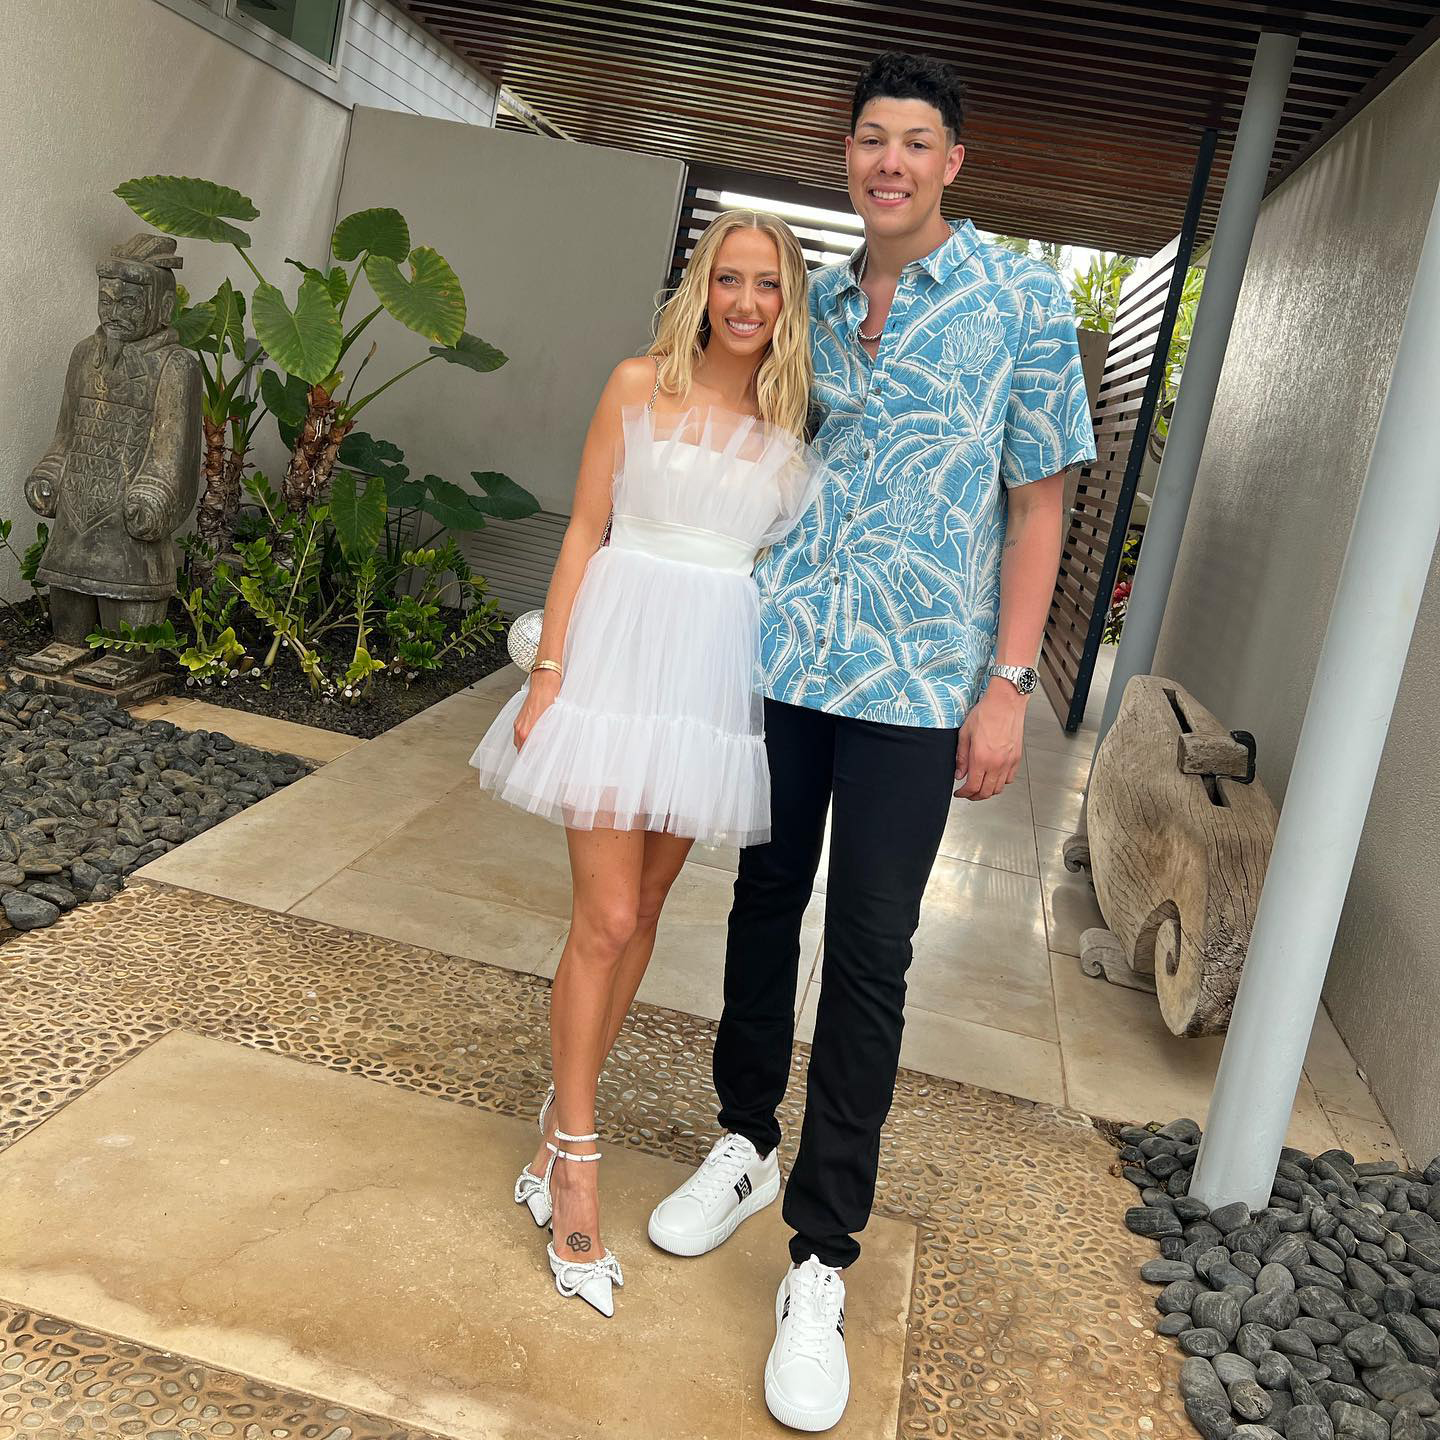 Inside NFL Athlete Patrick Mahomes and Fiancee Brittany Matthews’ Pre-Wedding Celebrations in Hawaii: Photos